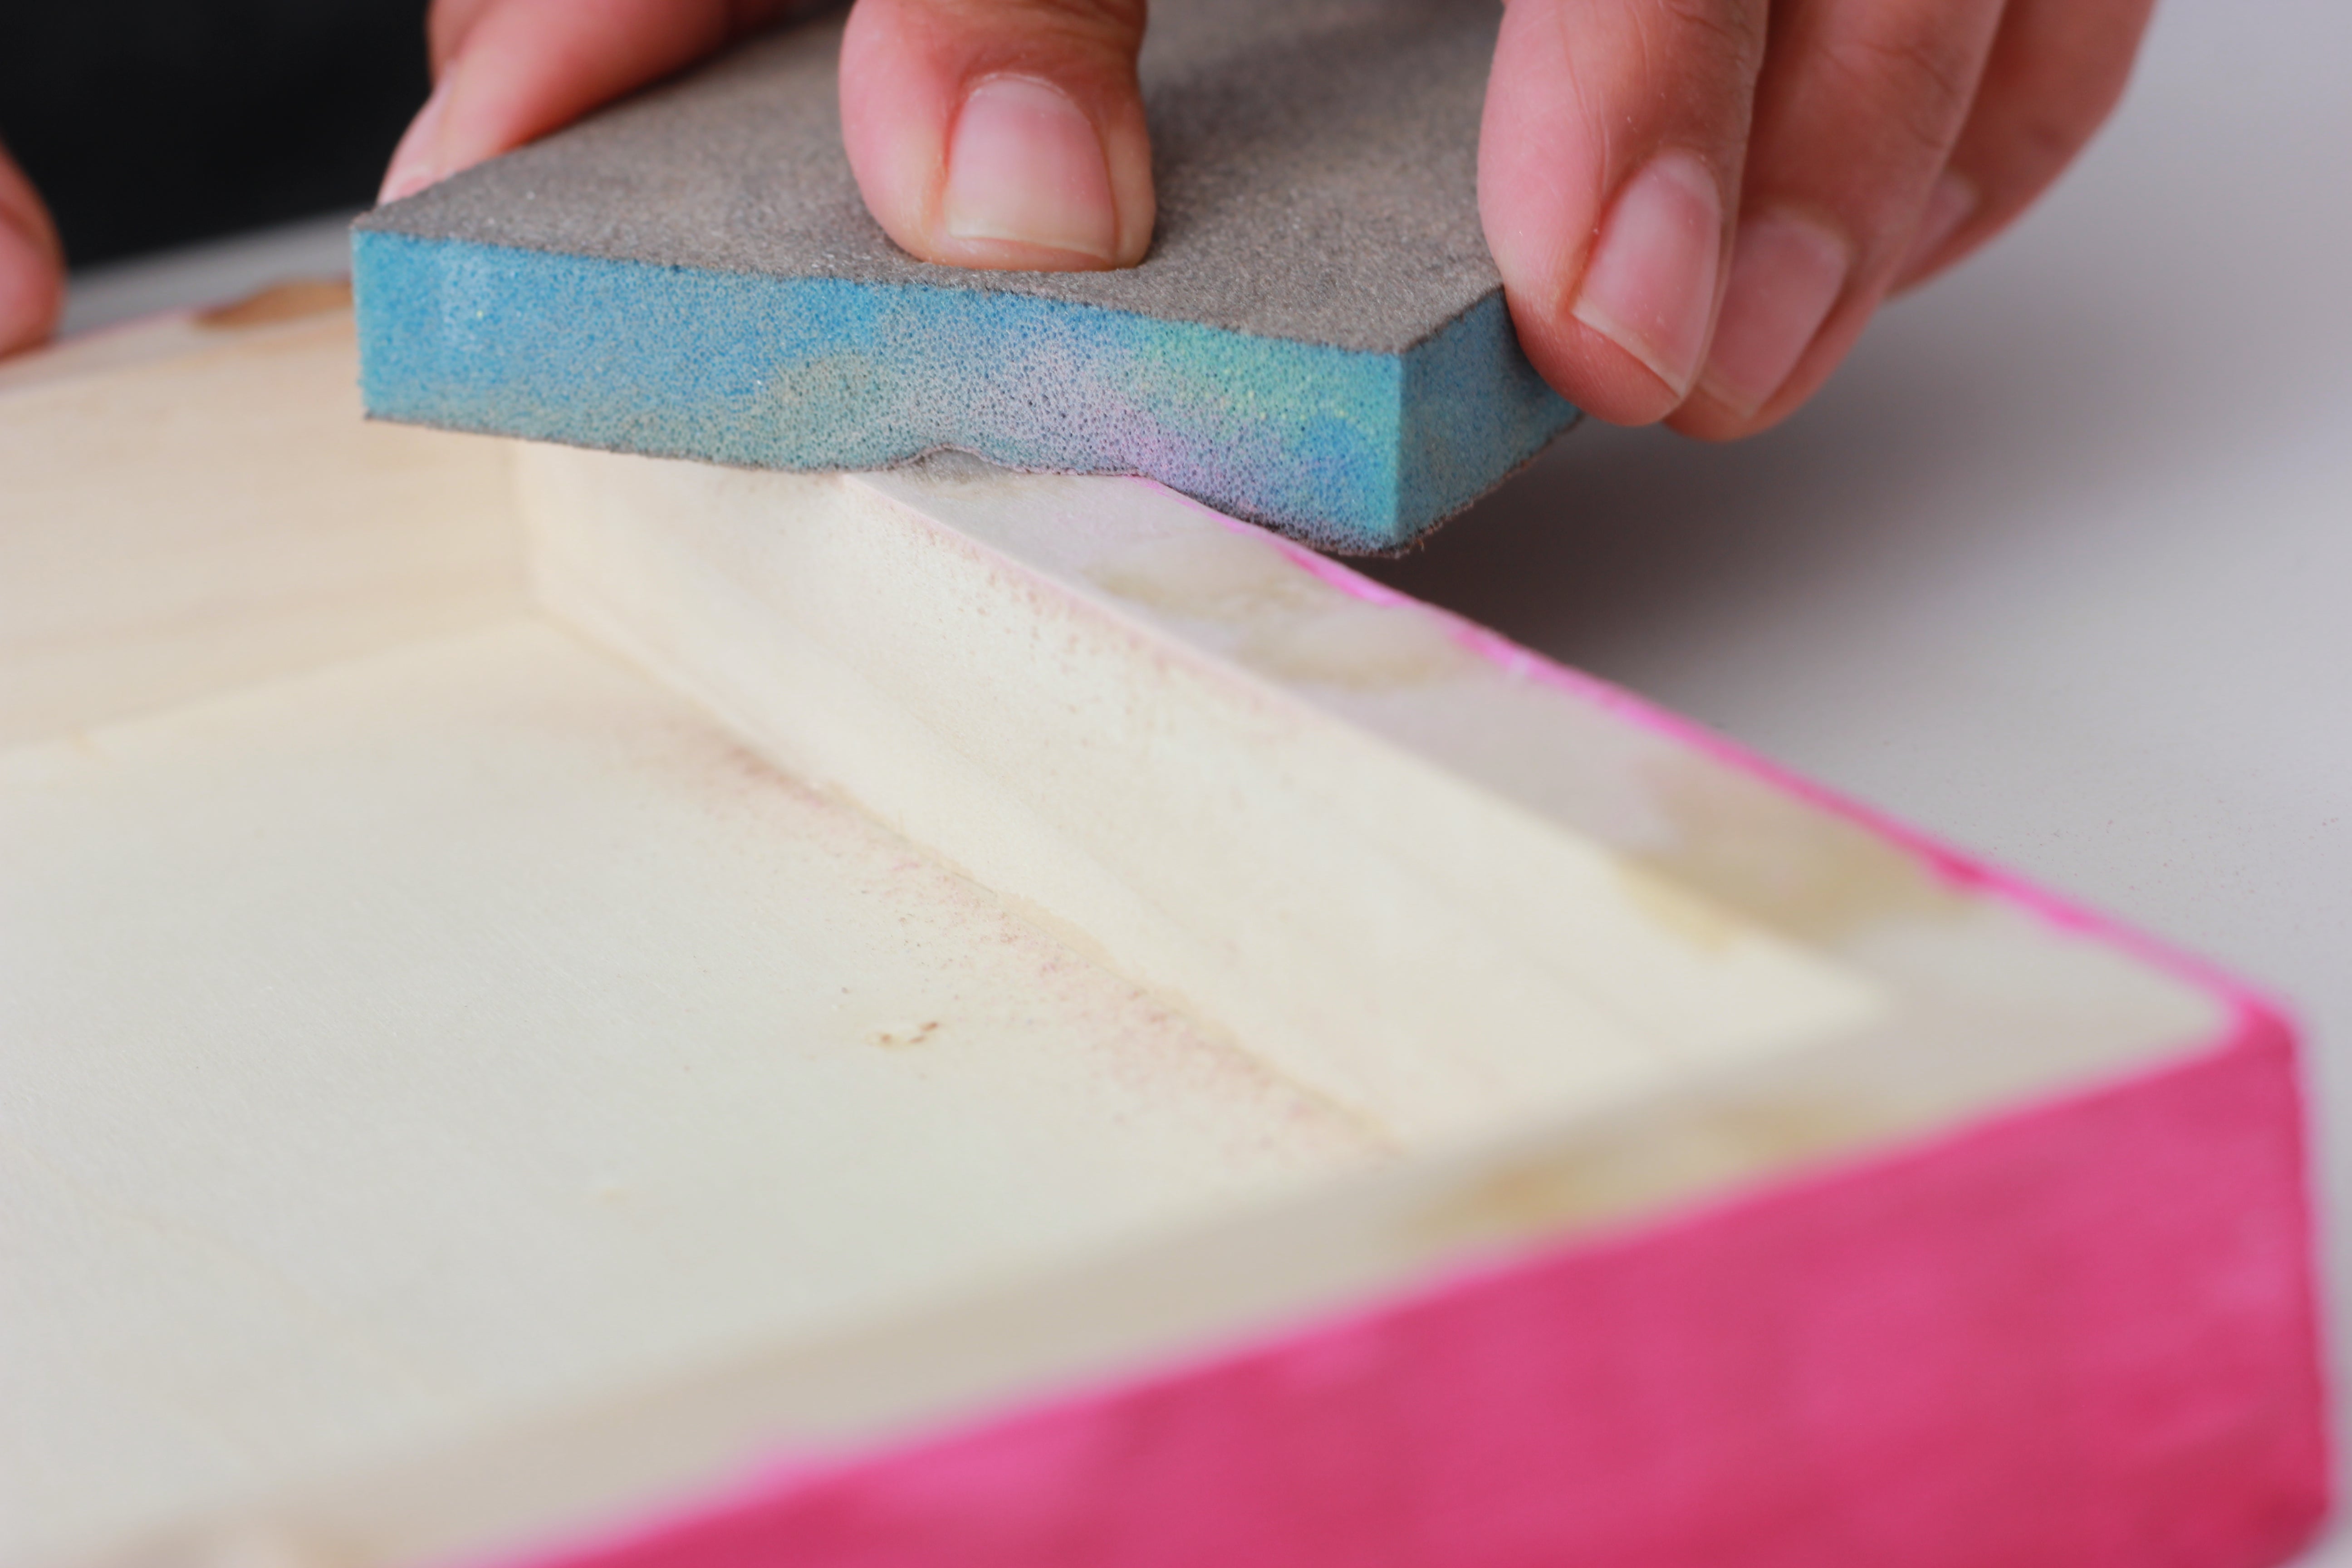 Fix Epoxy Resin Drips - sand them off with sandpaper or a sanding block